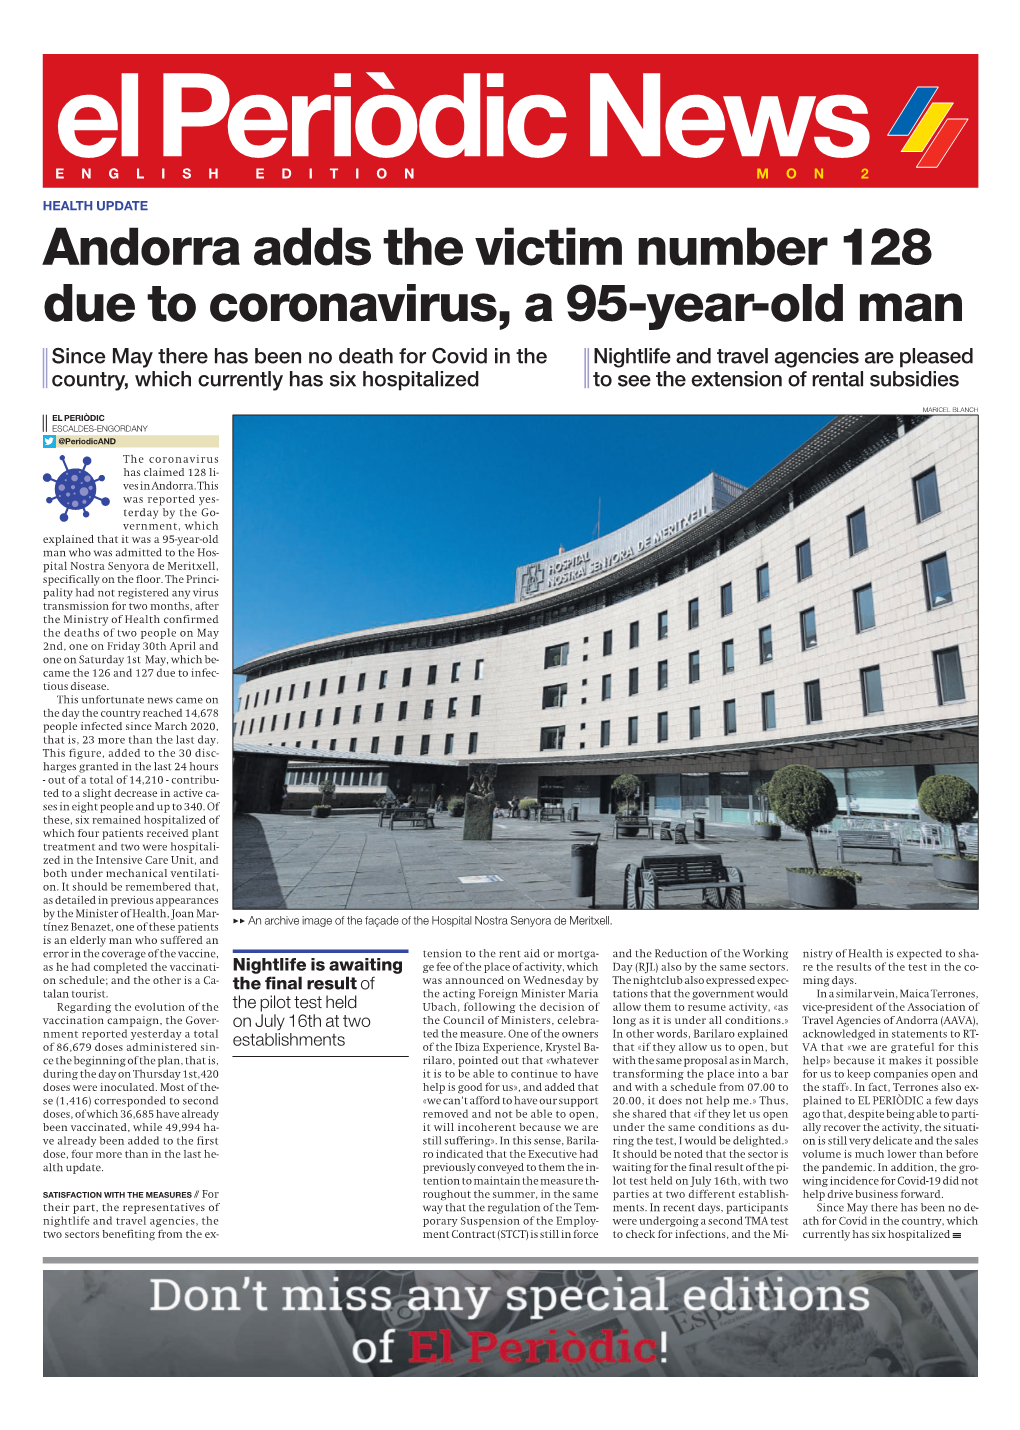 Andorra Adds the Victim Number 128 Due to Coronavirus, a 95-Year-Old